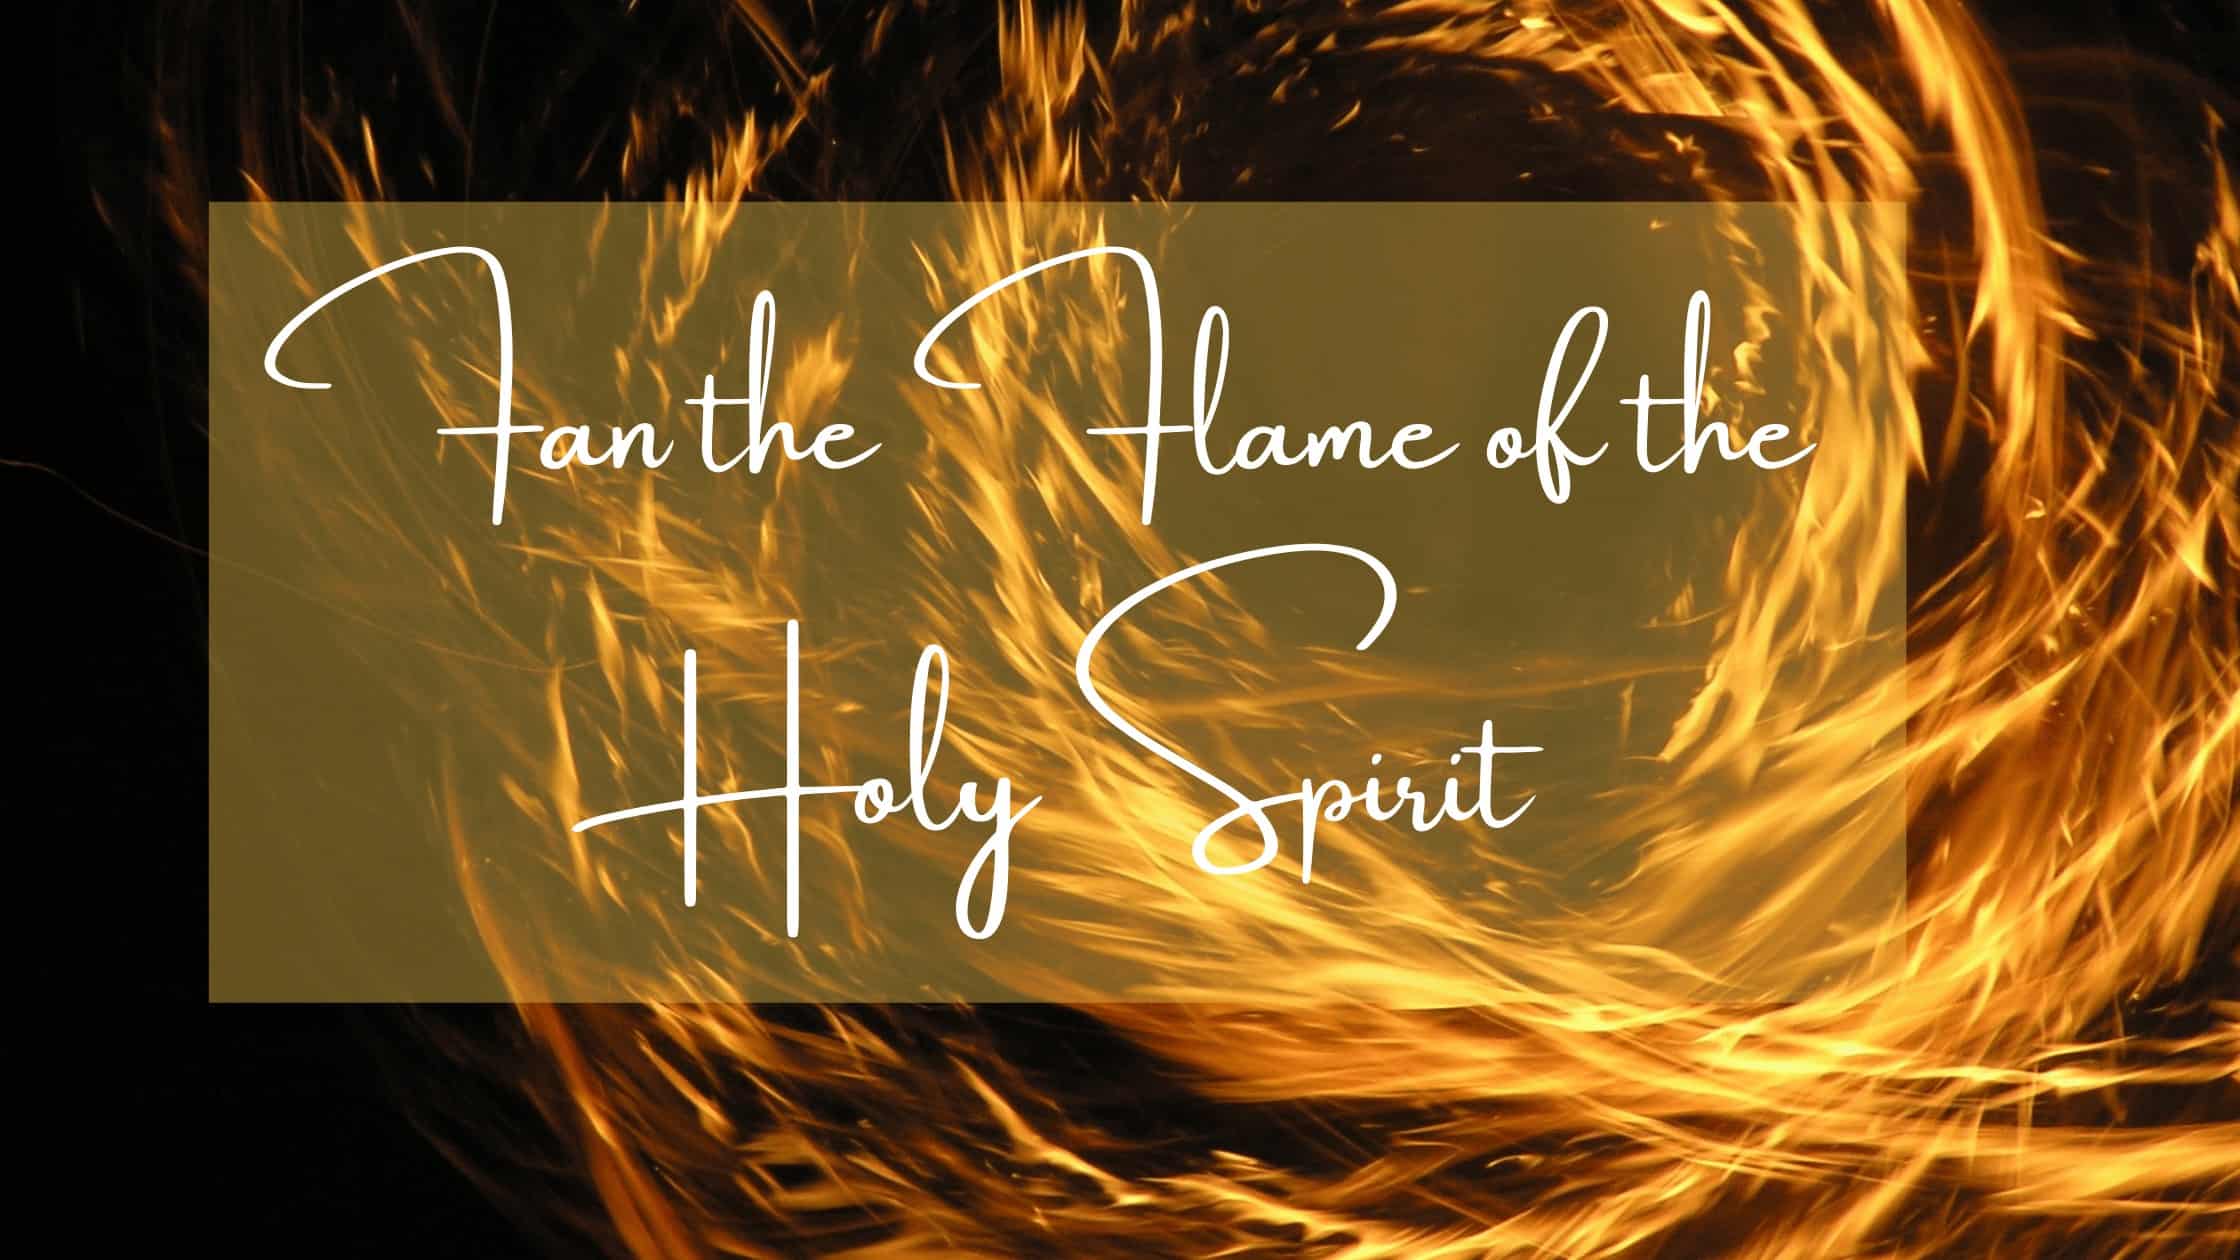 klud fusion konsensus Fan the Flame of the Holy Spirit -